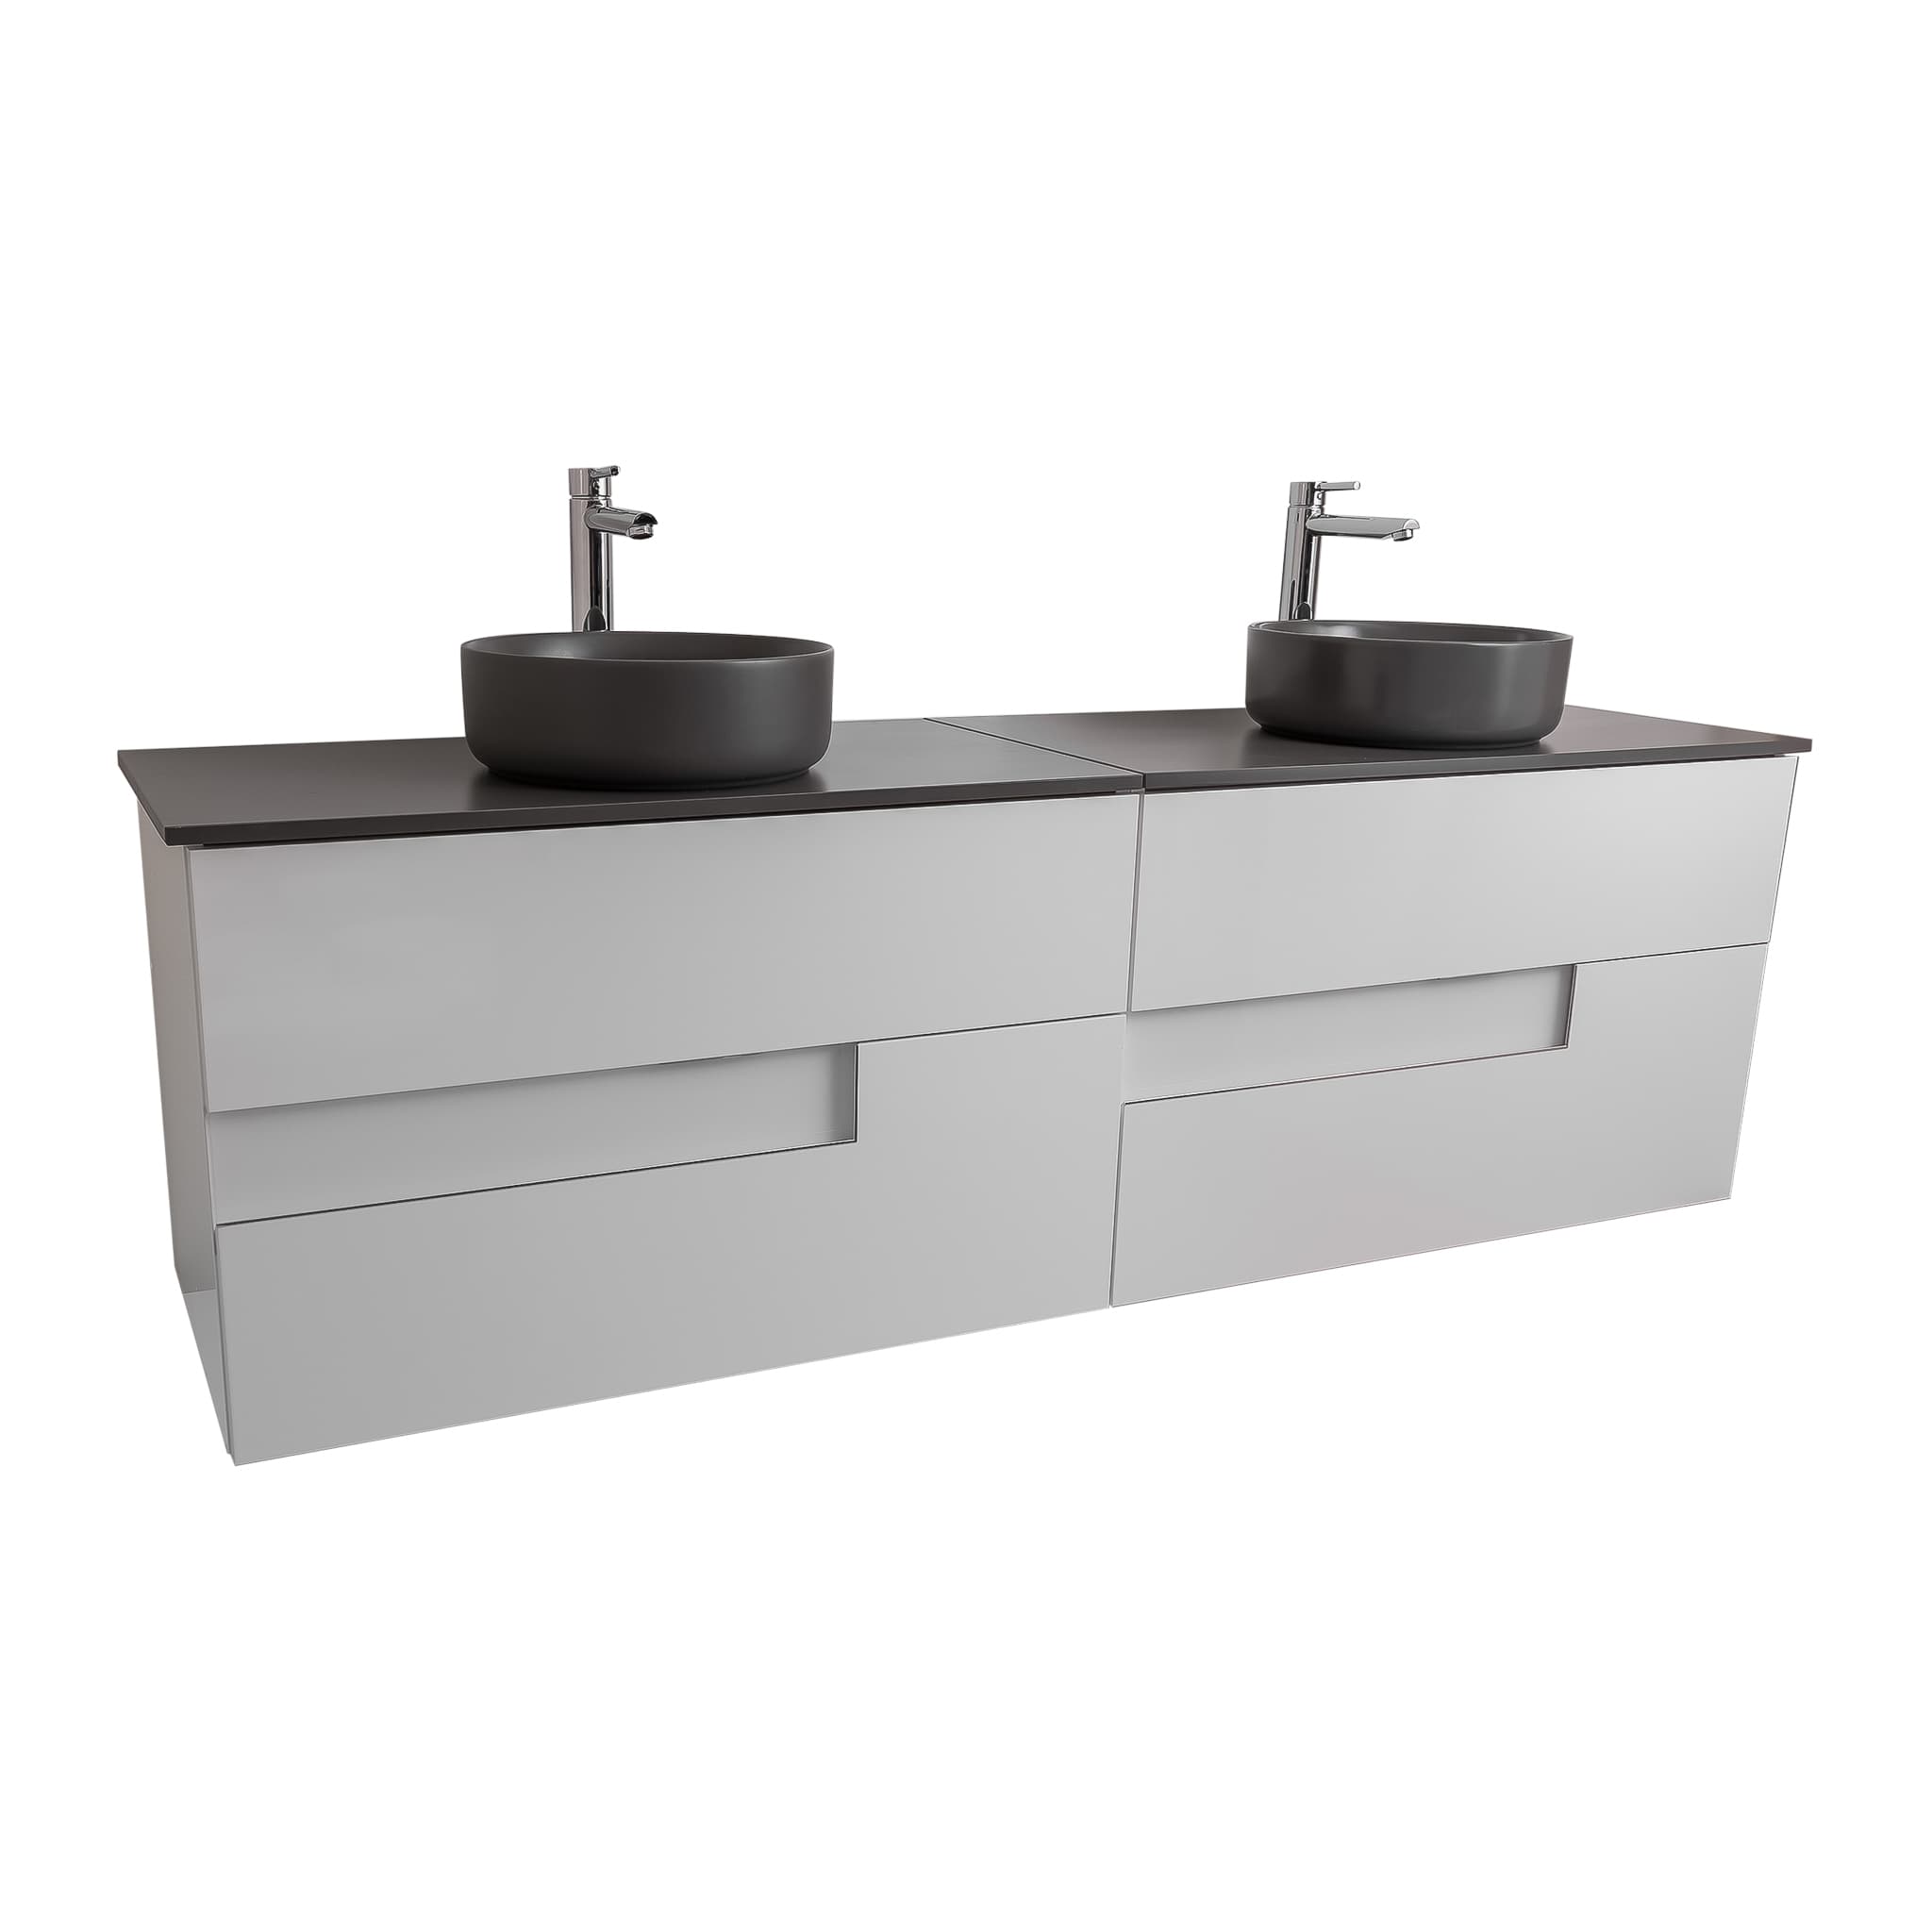 Vision 63 White High Gloss Cabinet, Ares Grey Ceniza Top And Two Ares Grey Ceniza Ceramic Basin, Wall Mounted Modern Vanity Set